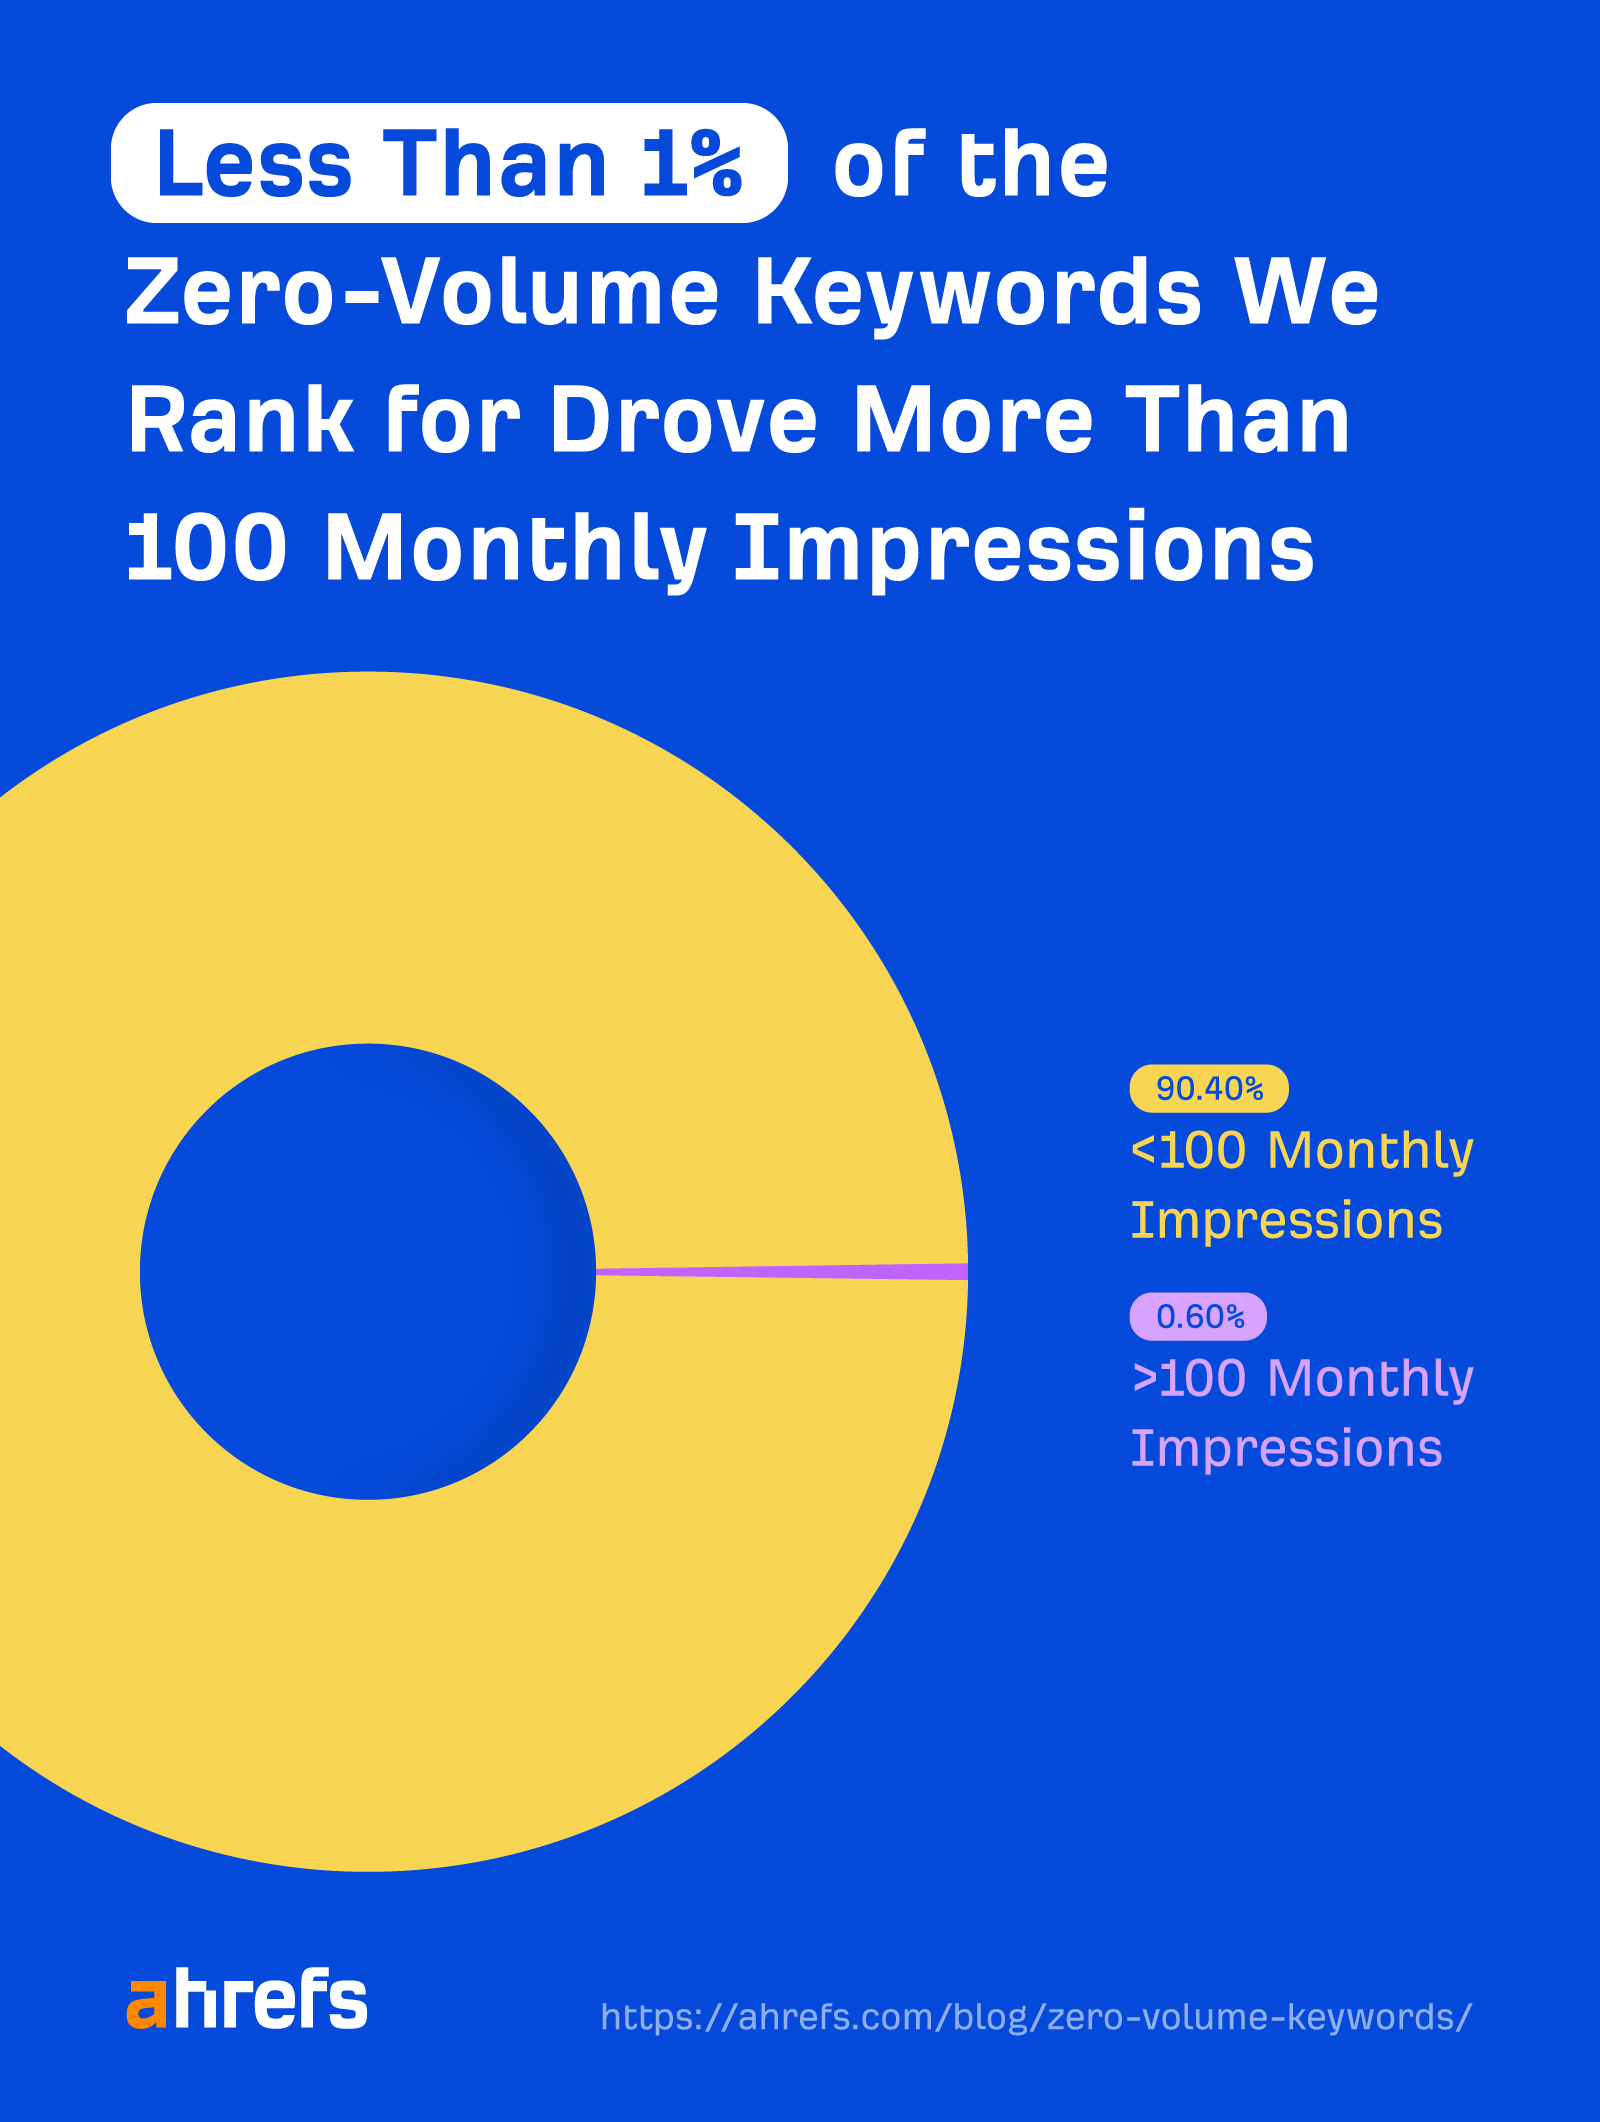 Less than 1% of the zero-volume keywords we rank for drove more than 100 monthly impressions